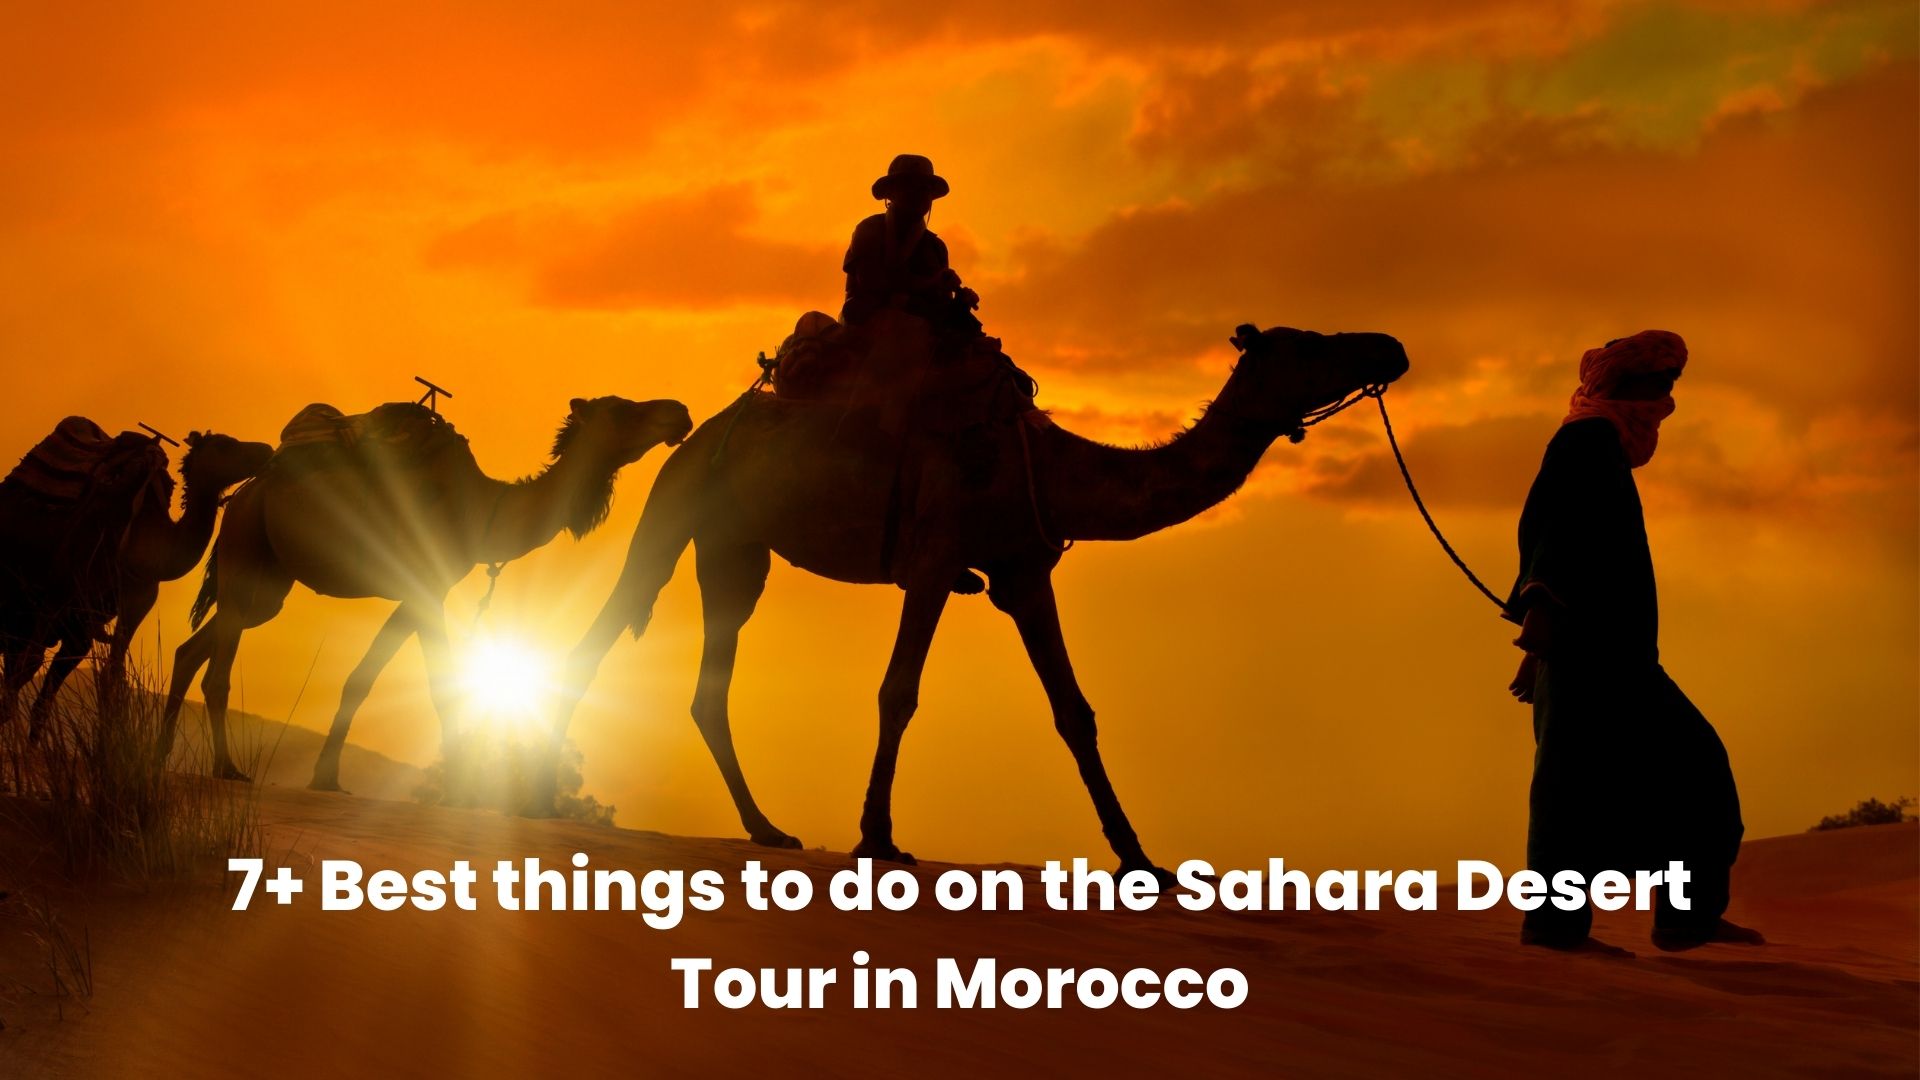 7+ Best things to do on the Sahara Desert Tour in Morocco